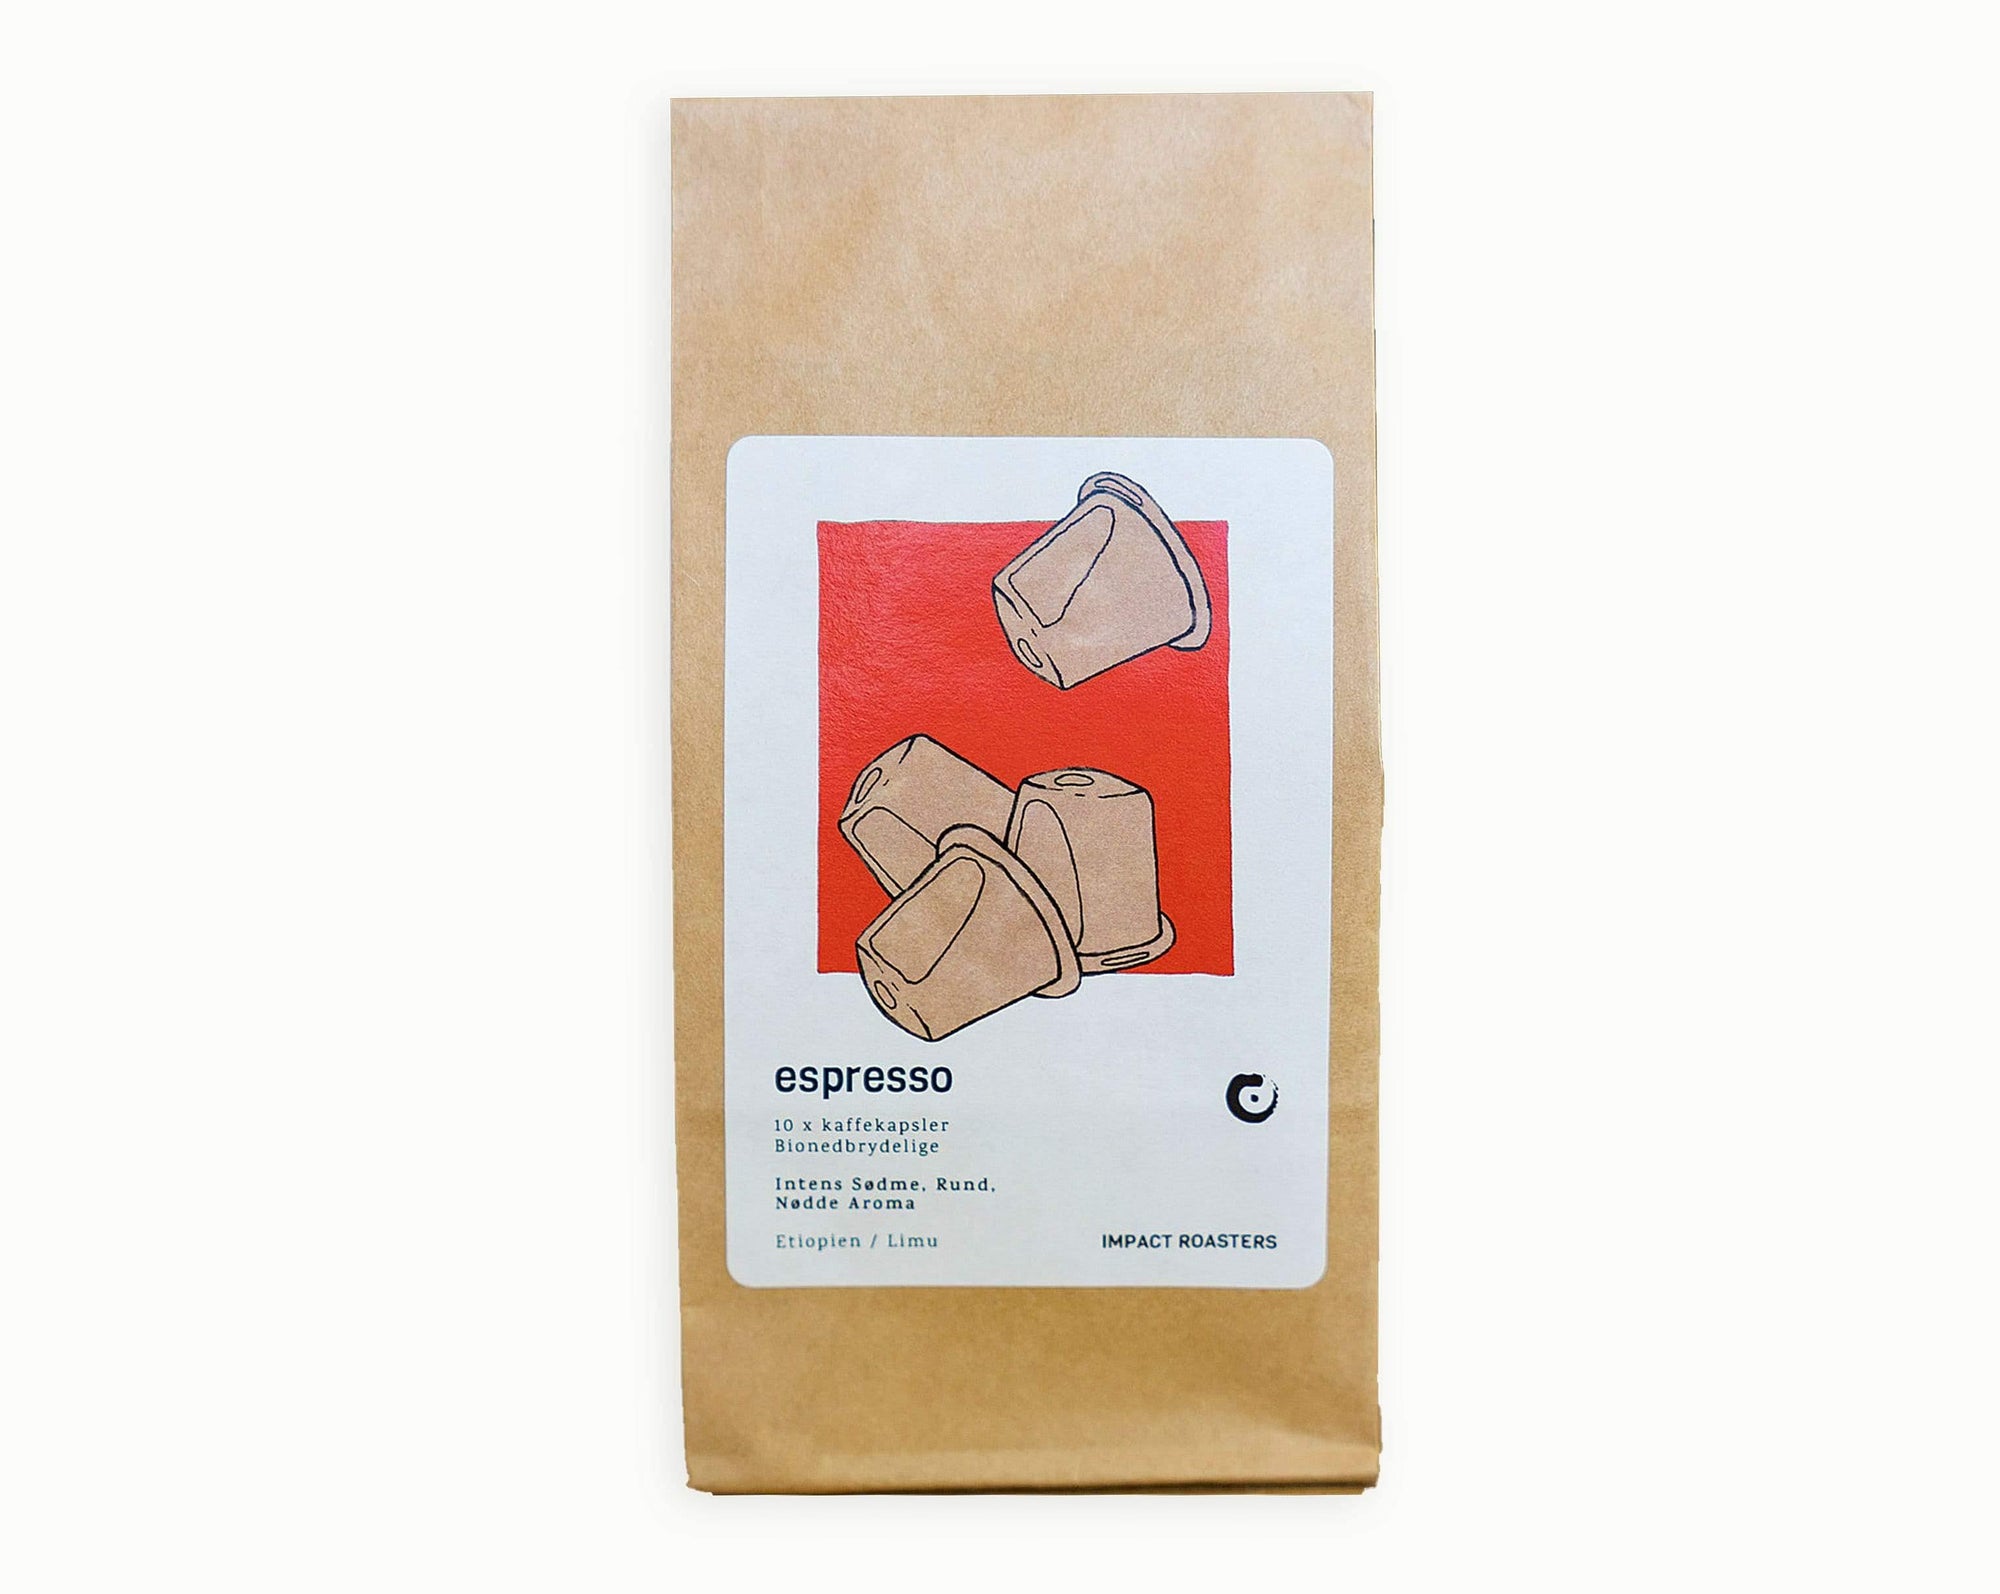 A bag of biodegradable and compostable espresso capsules of Ethiopian coffee from Limu region